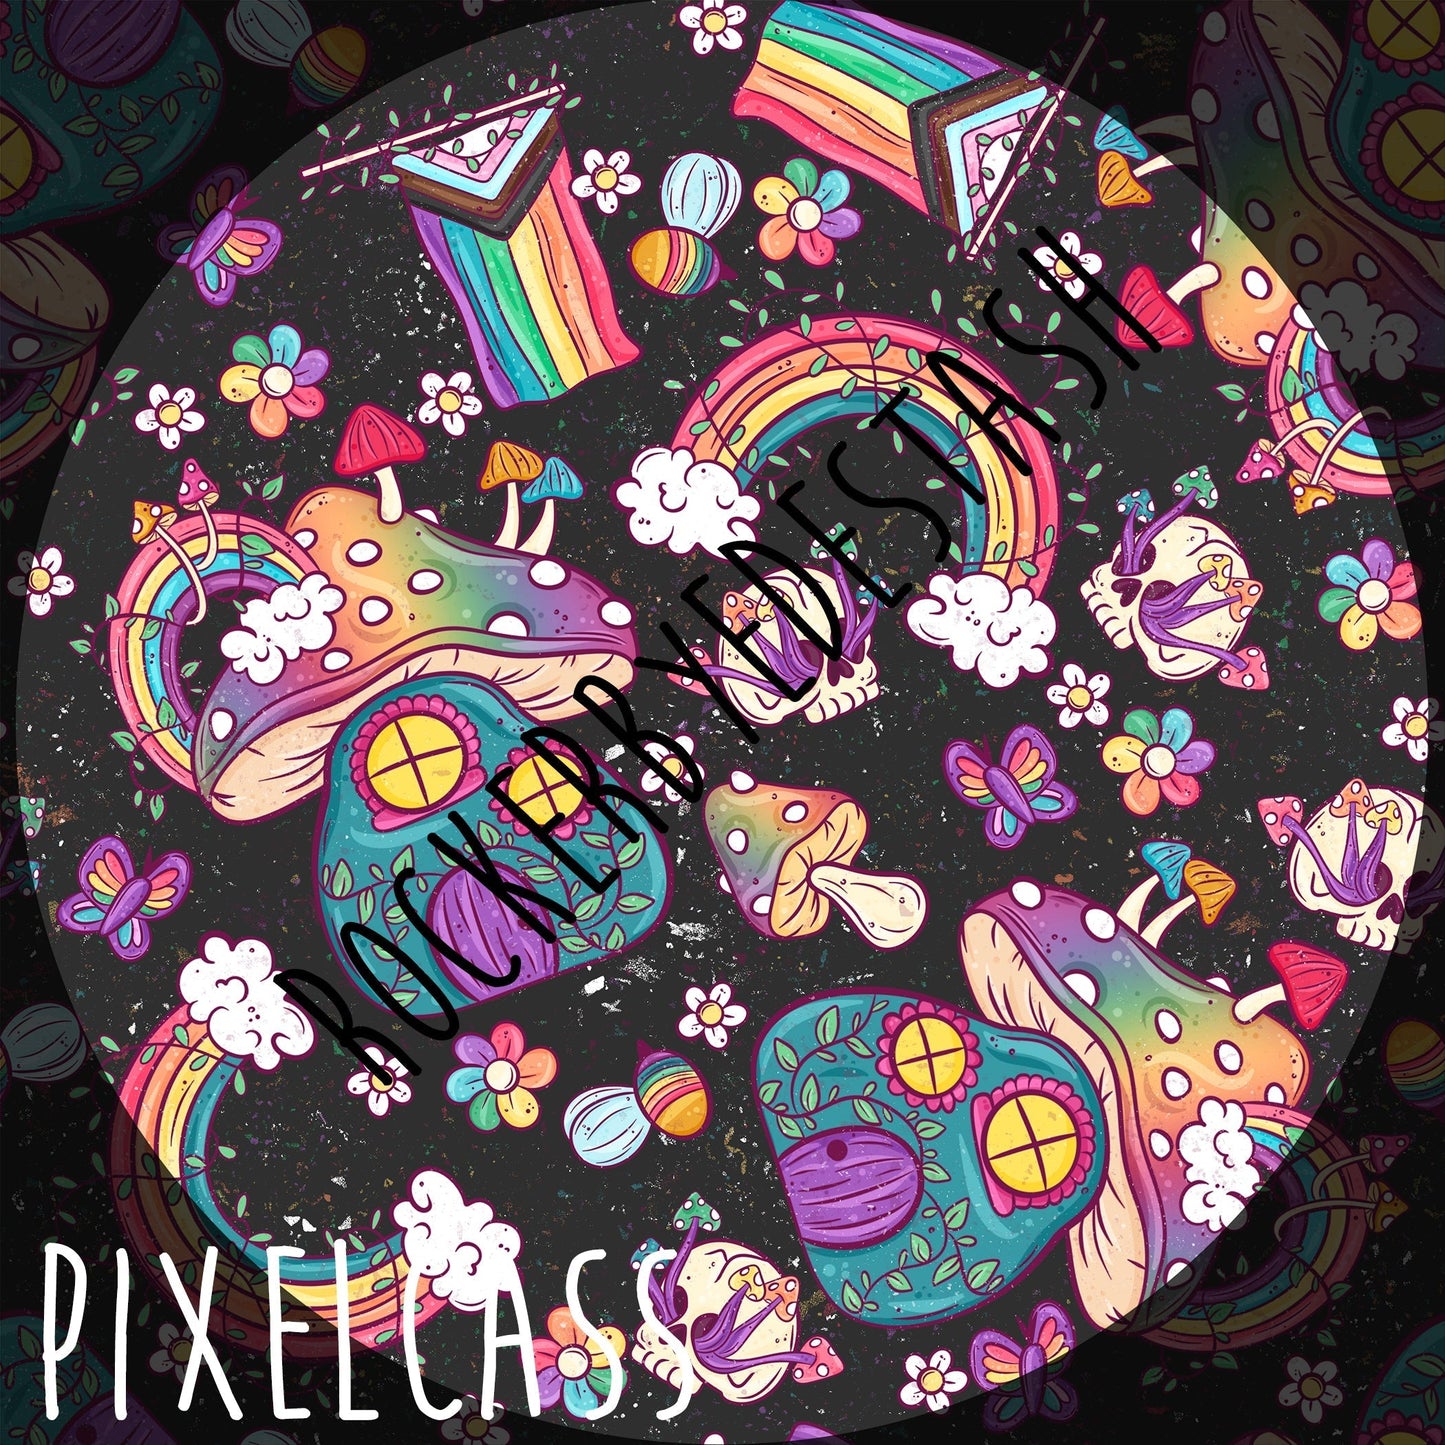 Cotton Double Gauze - PixelCass Collab Retail Round YY - super special flower, pride & cottagecore fabric things inside